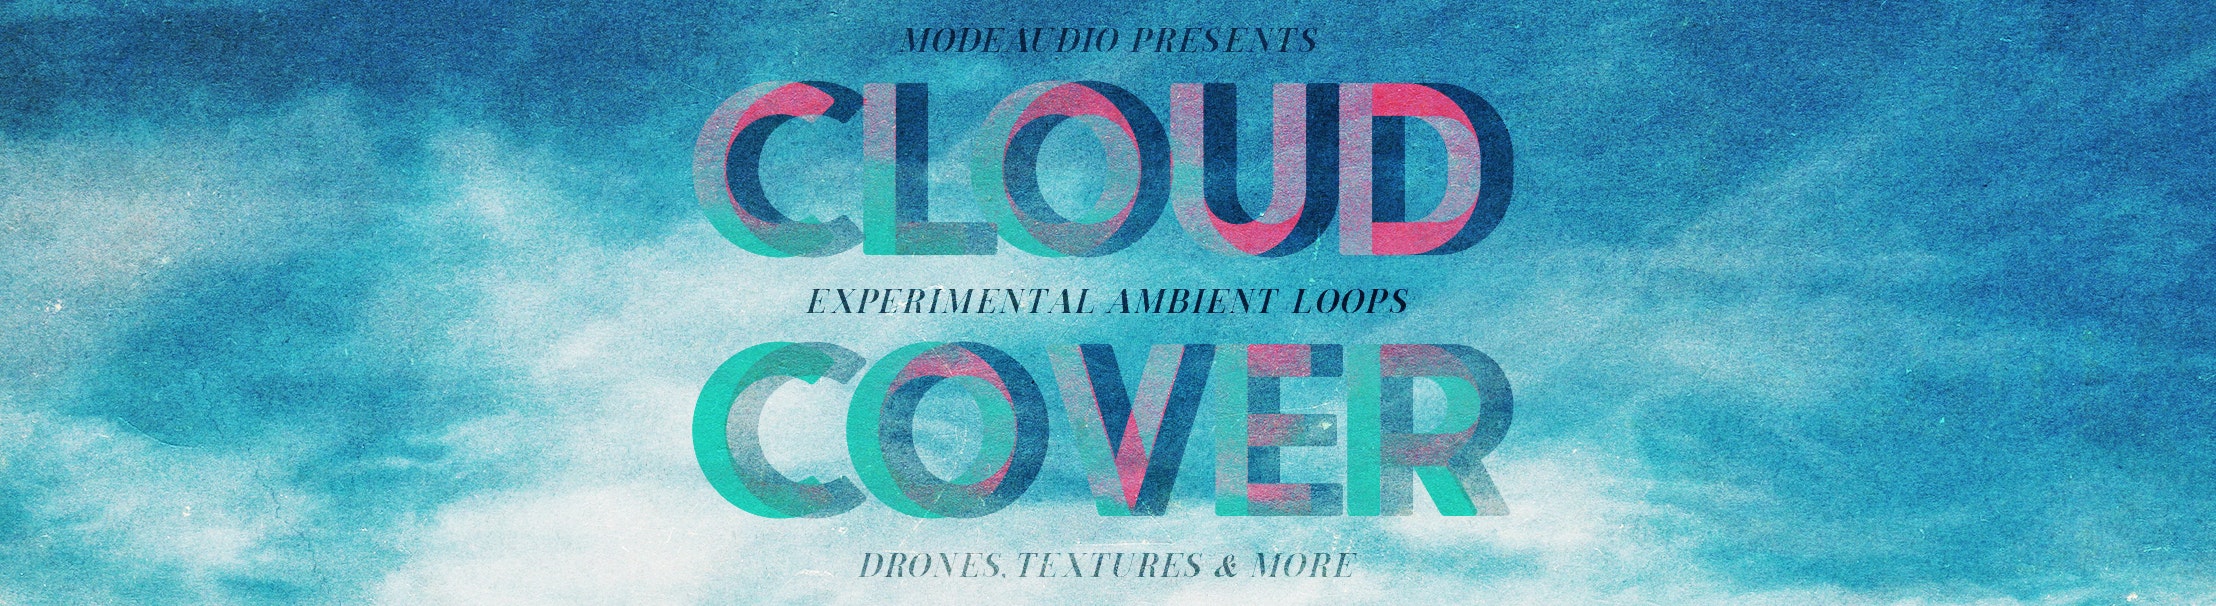 Cloud Cover Experimental Ambient Loops